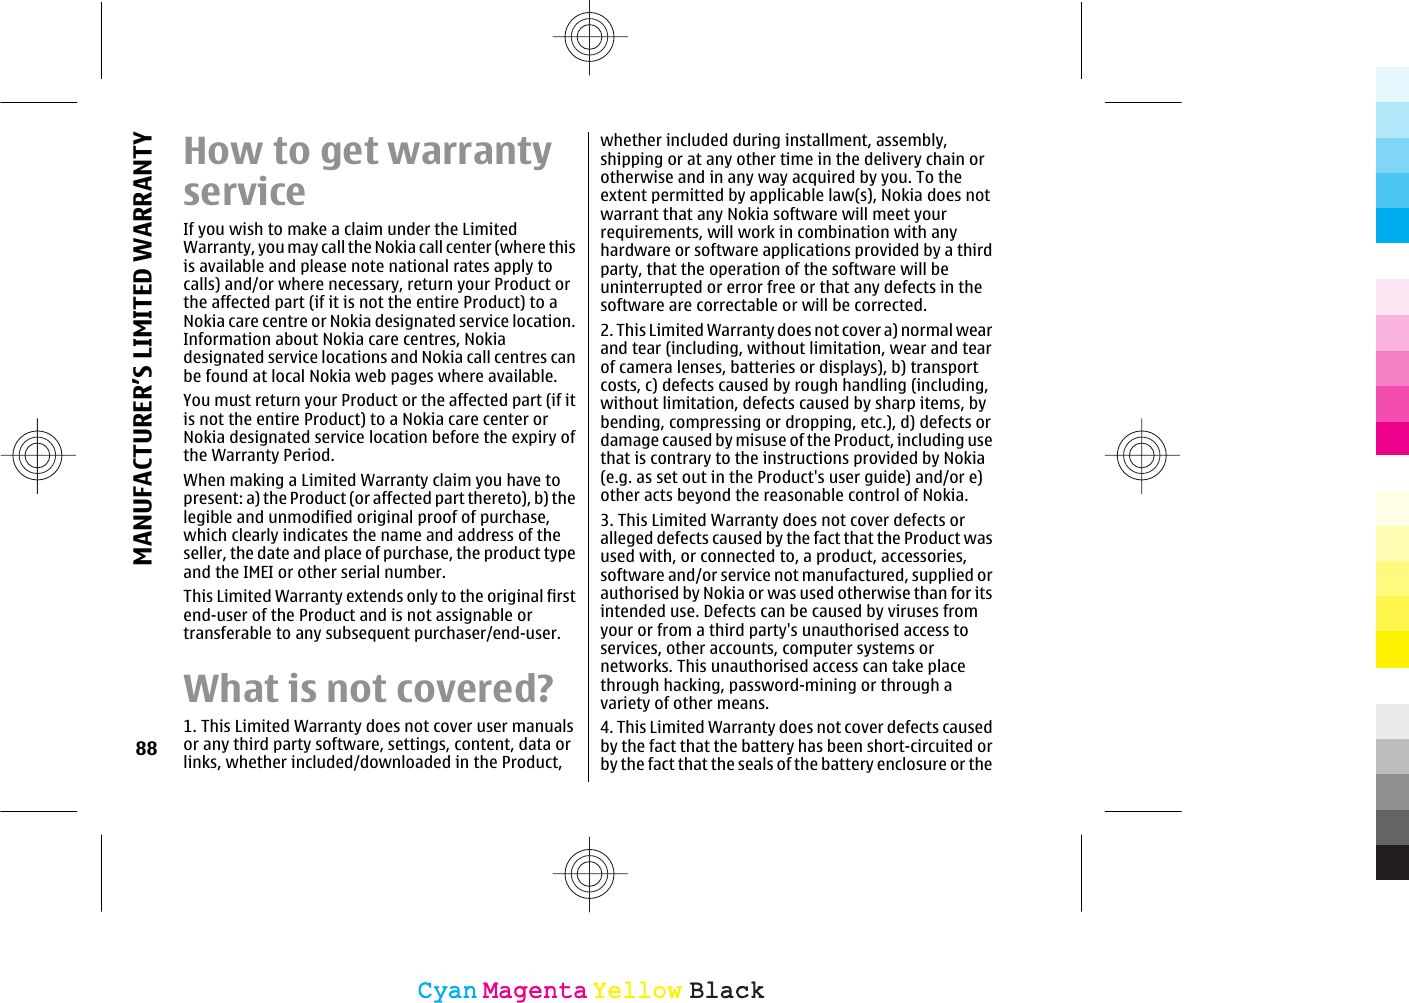 How to get warrantyserviceIf you wish to make a claim under the LimitedWarranty, you may call the Nokia call center (where thisis available and please note national rates apply tocalls) and/or where necessary, return your Product orthe affected part (if it is not the entire Product) to aNokia care centre or Nokia designated service location.Information about Nokia care centres, Nokiadesignated service locations and Nokia call centres canbe found at local Nokia web pages where available.You must return your Product or the affected part (if itis not the entire Product) to a Nokia care center orNokia designated service location before the expiry ofthe Warranty Period.When making a Limited Warranty claim you have topresent: a) the Product (or affected part thereto), b) thelegible and unmodified original proof of purchase,which clearly indicates the name and address of theseller, the date and place of purchase, the product typeand the IMEI or other serial number.This Limited Warranty extends only to the original firstend-user of the Product and is not assignable ortransferable to any subsequent purchaser/end-user.What is not covered?1. This Limited Warranty does not cover user manualsor any third party software, settings, content, data orlinks, whether included/downloaded in the Product,whether included during installment, assembly,shipping or at any other time in the delivery chain orotherwise and in any way acquired by you. To theextent permitted by applicable law(s), Nokia does notwarrant that any Nokia software will meet yourrequirements, will work in combination with anyhardware or software applications provided by a thirdparty, that the operation of the software will beuninterrupted or error free or that any defects in thesoftware are correctable or will be corrected.2. This Limited Warranty does not cover a) normal wearand tear (including, without limitation, wear and tearof camera lenses, batteries or displays), b) transportcosts, c) defects caused by rough handling (including,without limitation, defects caused by sharp items, bybending, compressing or dropping, etc.), d) defects ordamage caused by misuse of the Product, including usethat is contrary to the instructions provided by Nokia(e.g. as set out in the Product&apos;s user guide) and/or e)other acts beyond the reasonable control of Nokia.3. This Limited Warranty does not cover defects oralleged defects caused by the fact that the Product wasused with, or connected to, a product, accessories,software and/or service not manufactured, supplied orauthorised by Nokia or was used otherwise than for itsintended use. Defects can be caused by viruses fromyour or from a third party&apos;s unauthorised access toservices, other accounts, computer systems ornetworks. This unauthorised access can take placethrough hacking, password-mining or through avariety of other means.4. This Limited Warranty does not cover defects causedby the fact that the battery has been short-circuited orby the fact that the seals of the battery enclosure or the88MANUFACTURER’S LIMITED WARRANTYCyanCyanMagentaMagentaYellowYellowBlackBlack